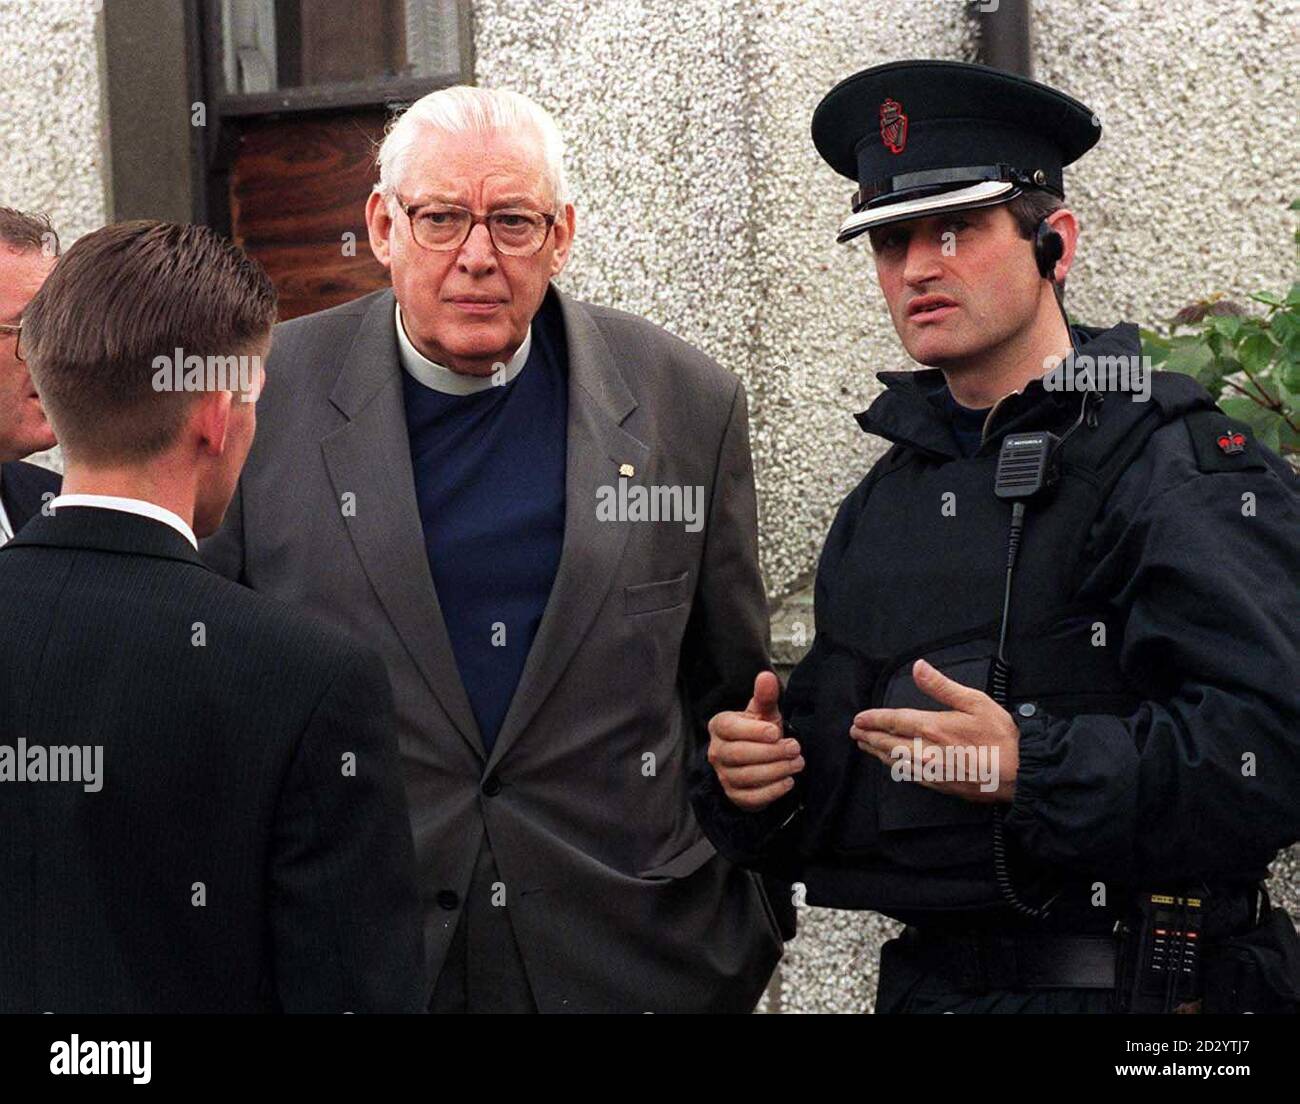 Dr Ian Paisley talks with an RUC Officer at Drumcree Church tonight (Sat) ahead of the controversial Orange Order March tomorrow.Photo John Giles.PA. Stock Photo